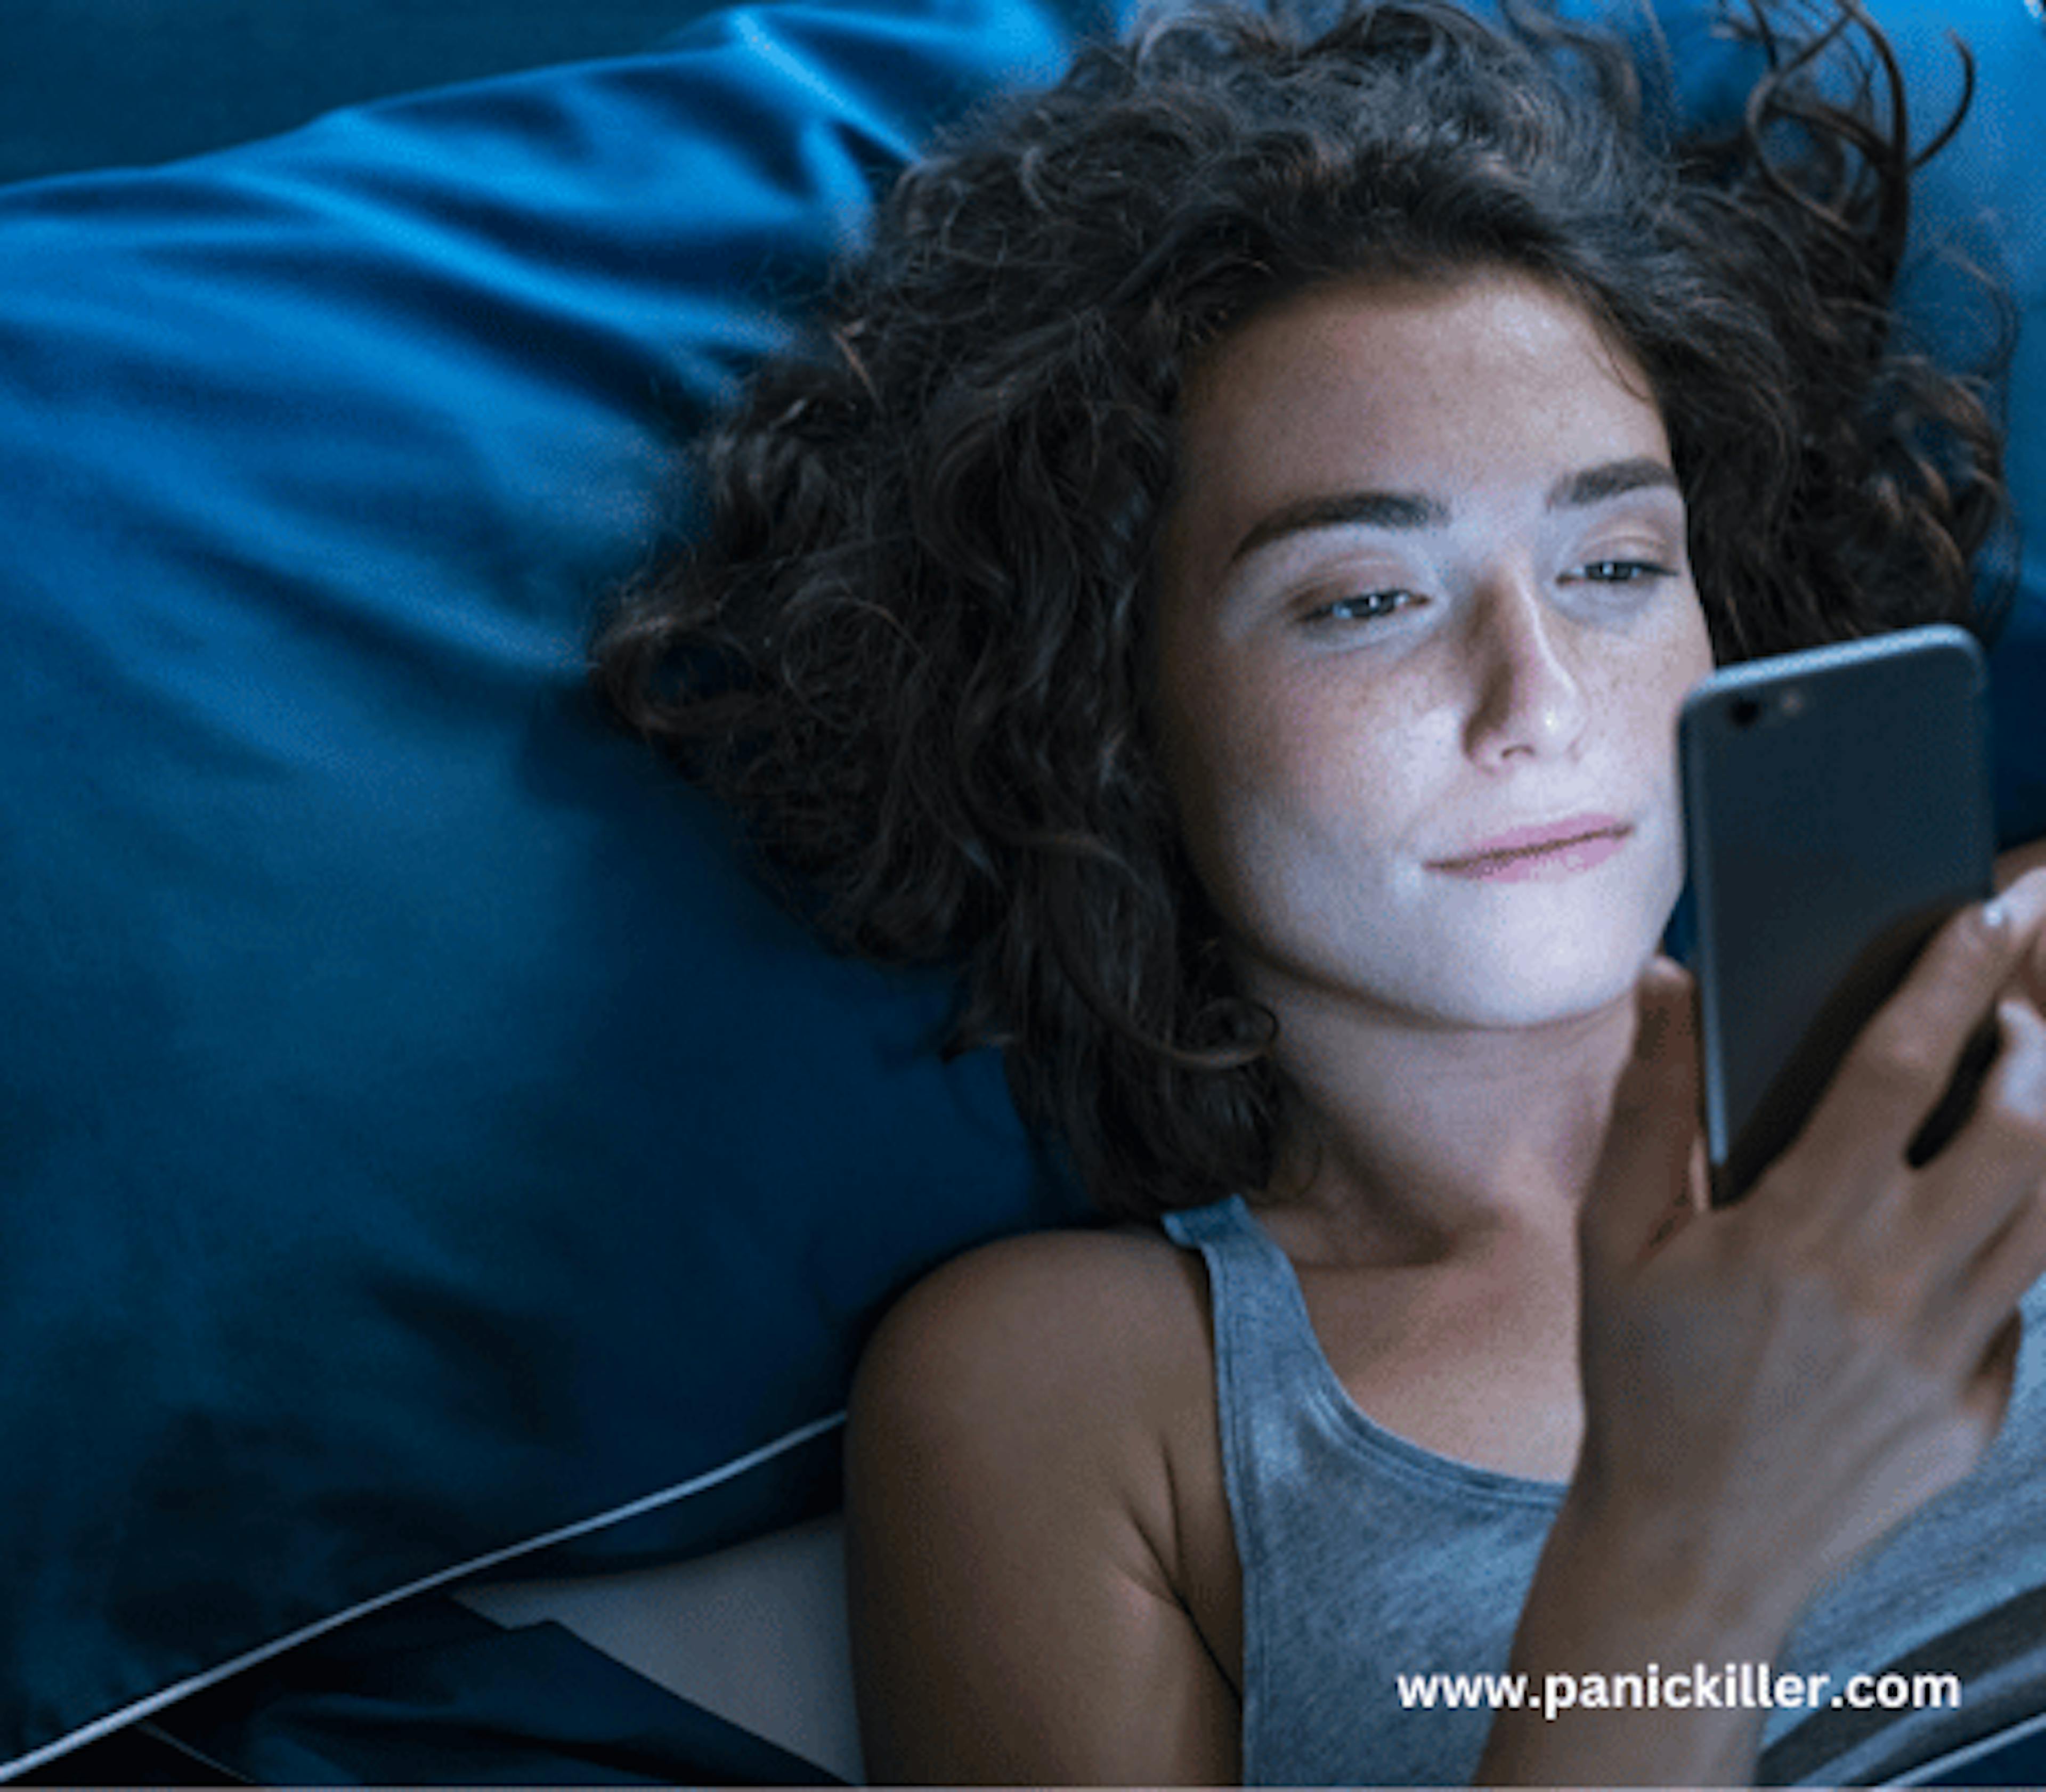 screen time before bed will affect your sleep quality